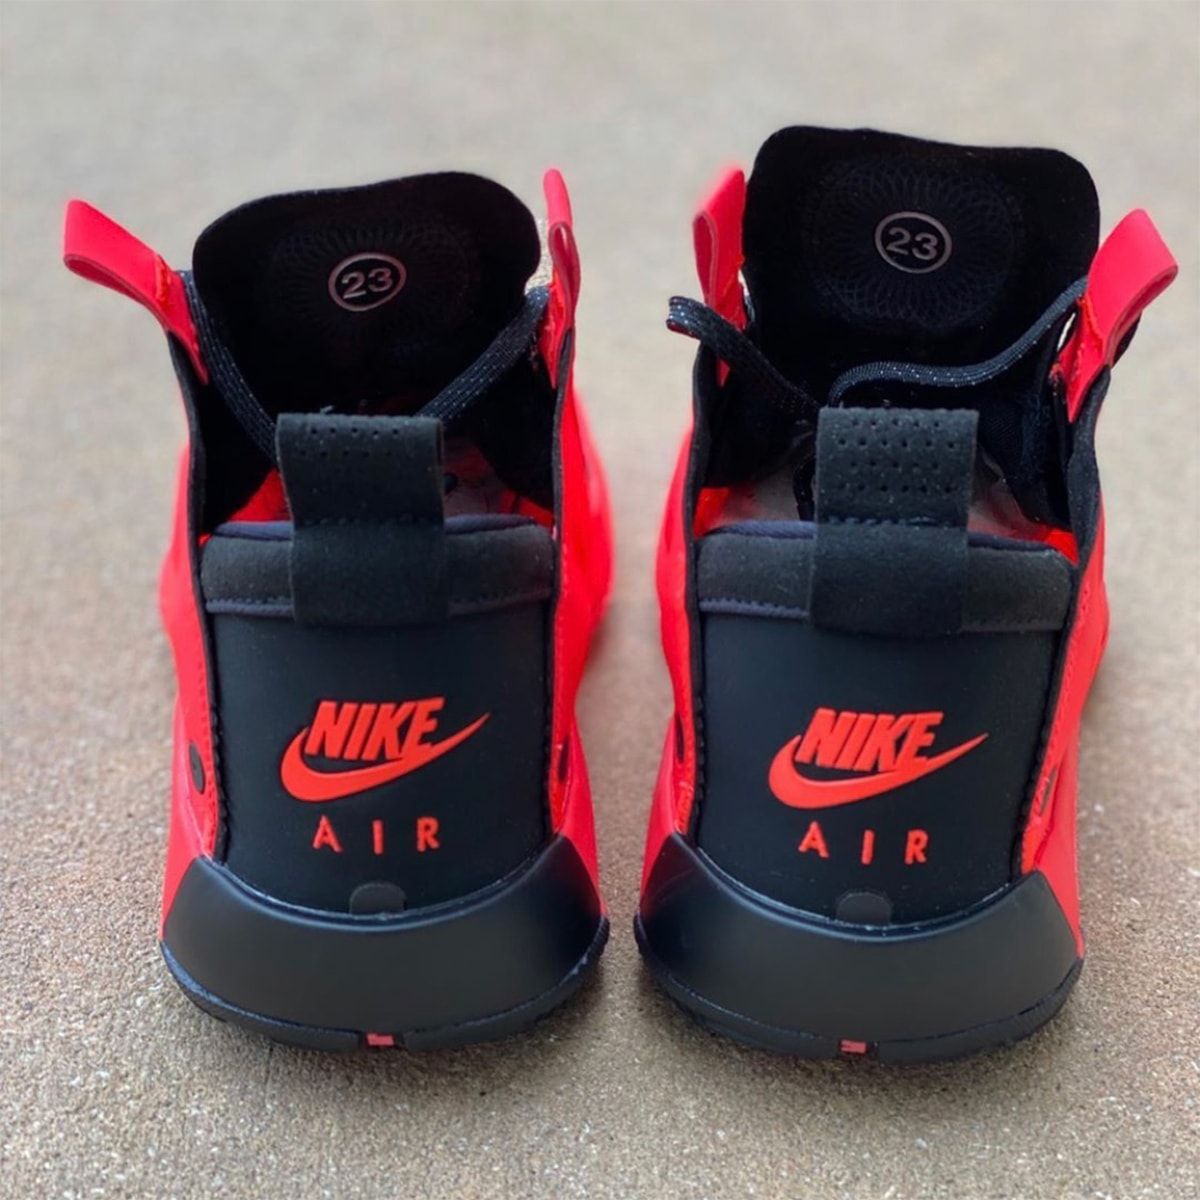 Air Jordan 34 “Infrared” Officially Unveiled | House of Heat°